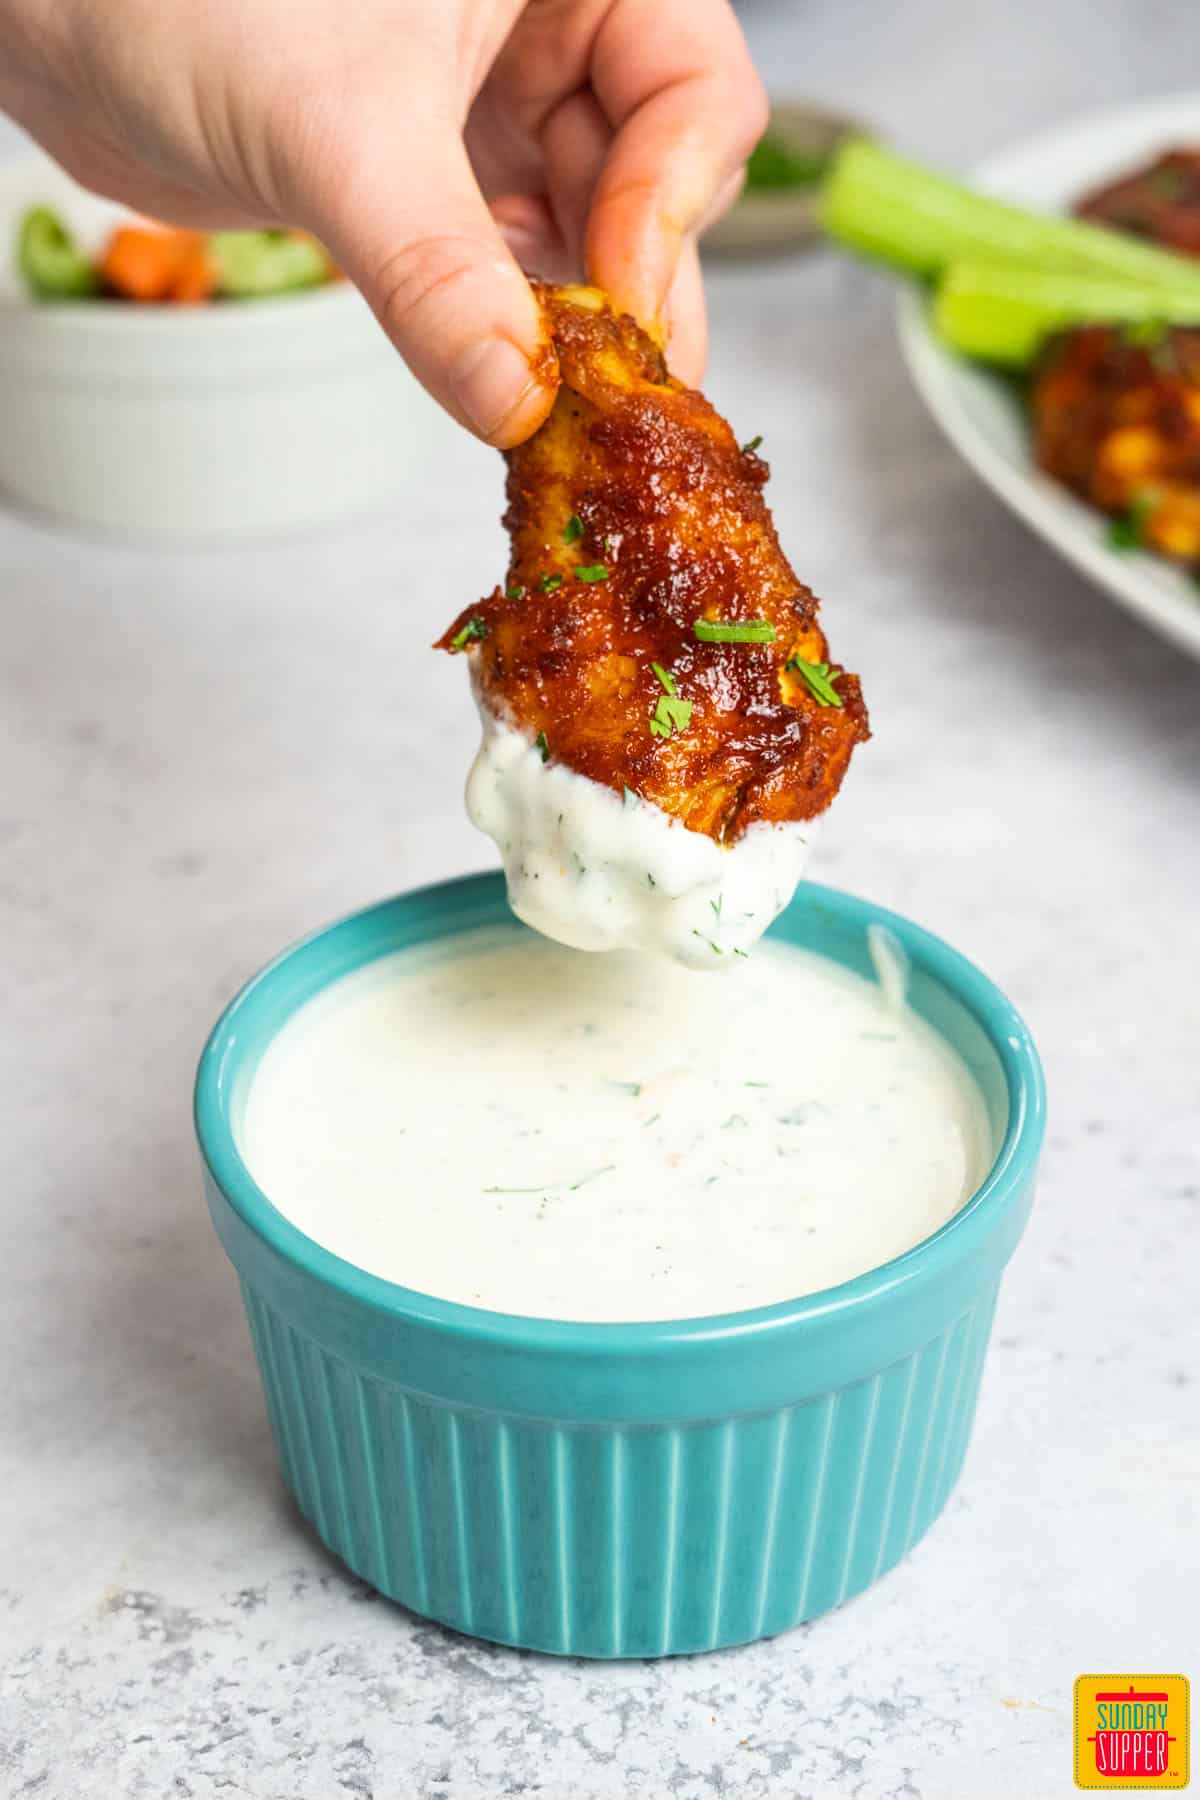 chicken wing dipping into ranch dressing in a blue dish